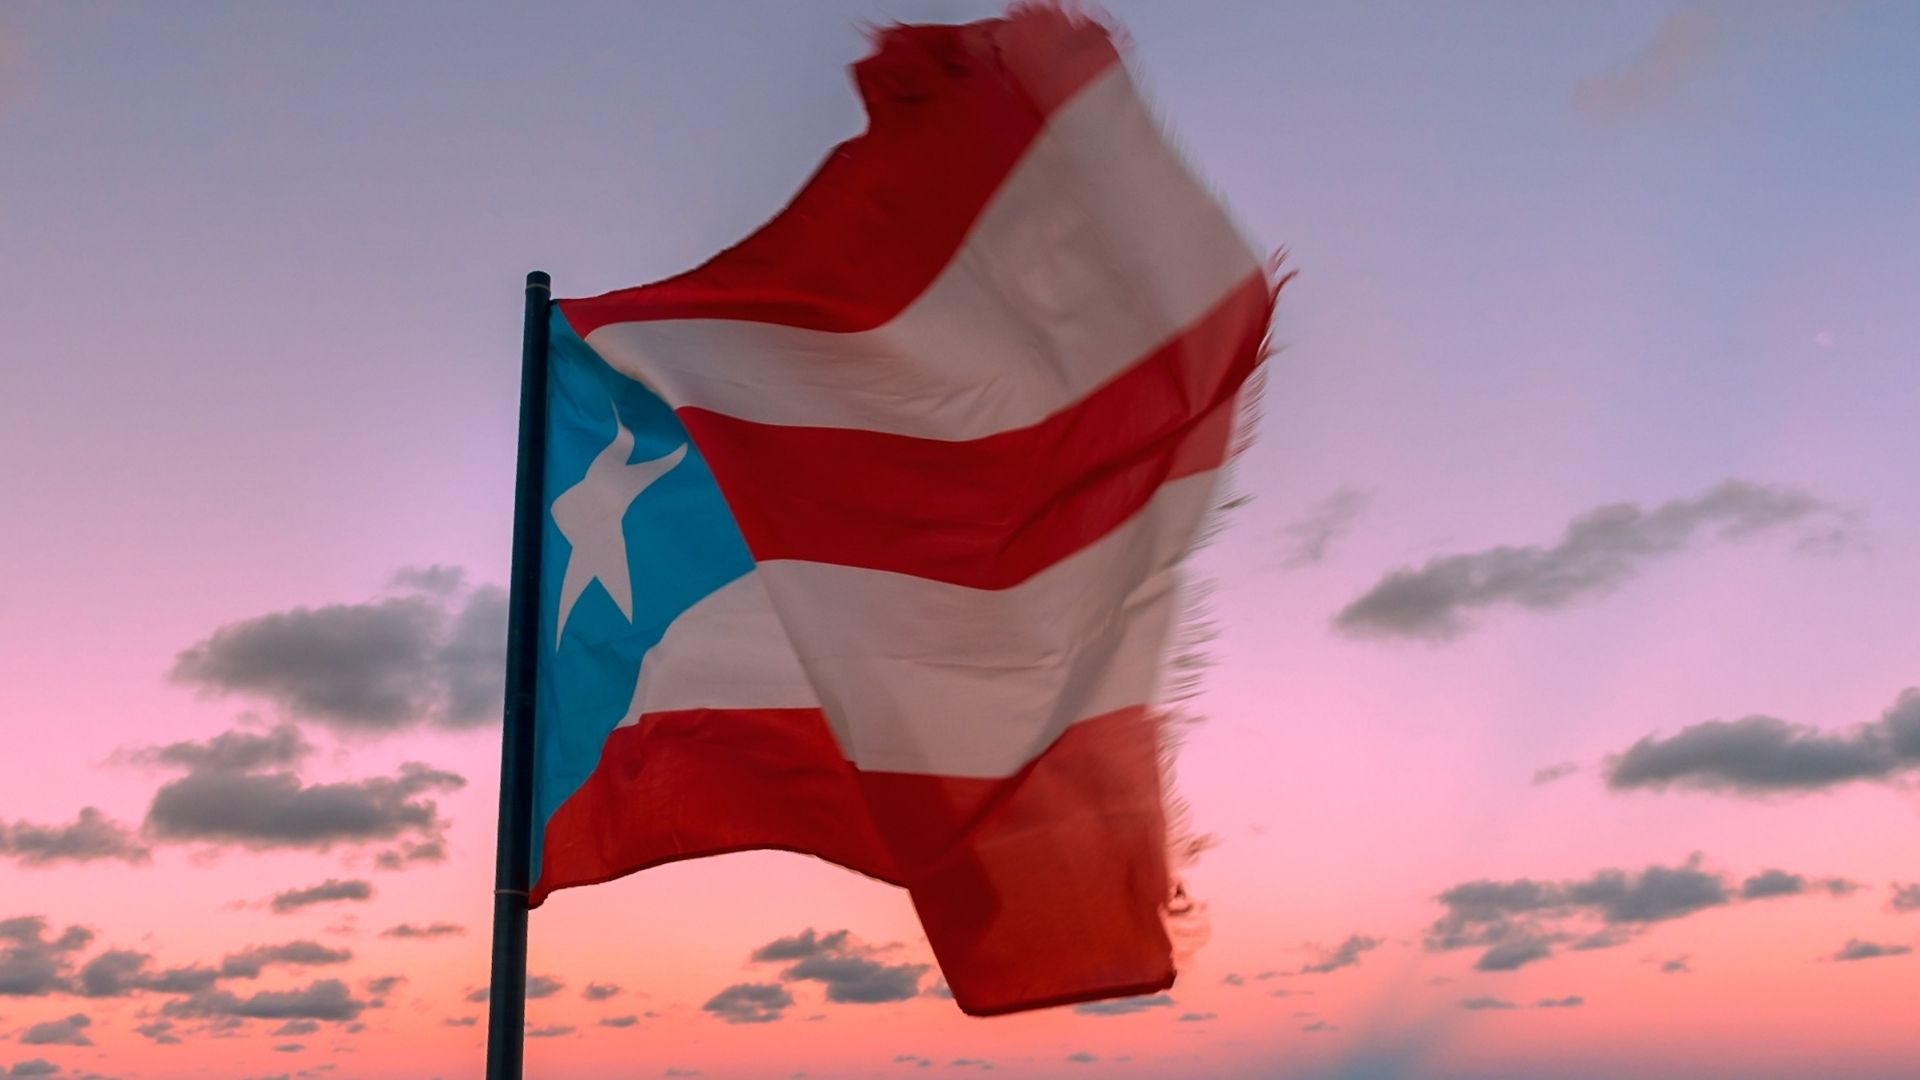 1920x1080 Civil Rights Groups Ask Supreme Court to Overturn Racist Rulings Against Puerto Rico | BELatina